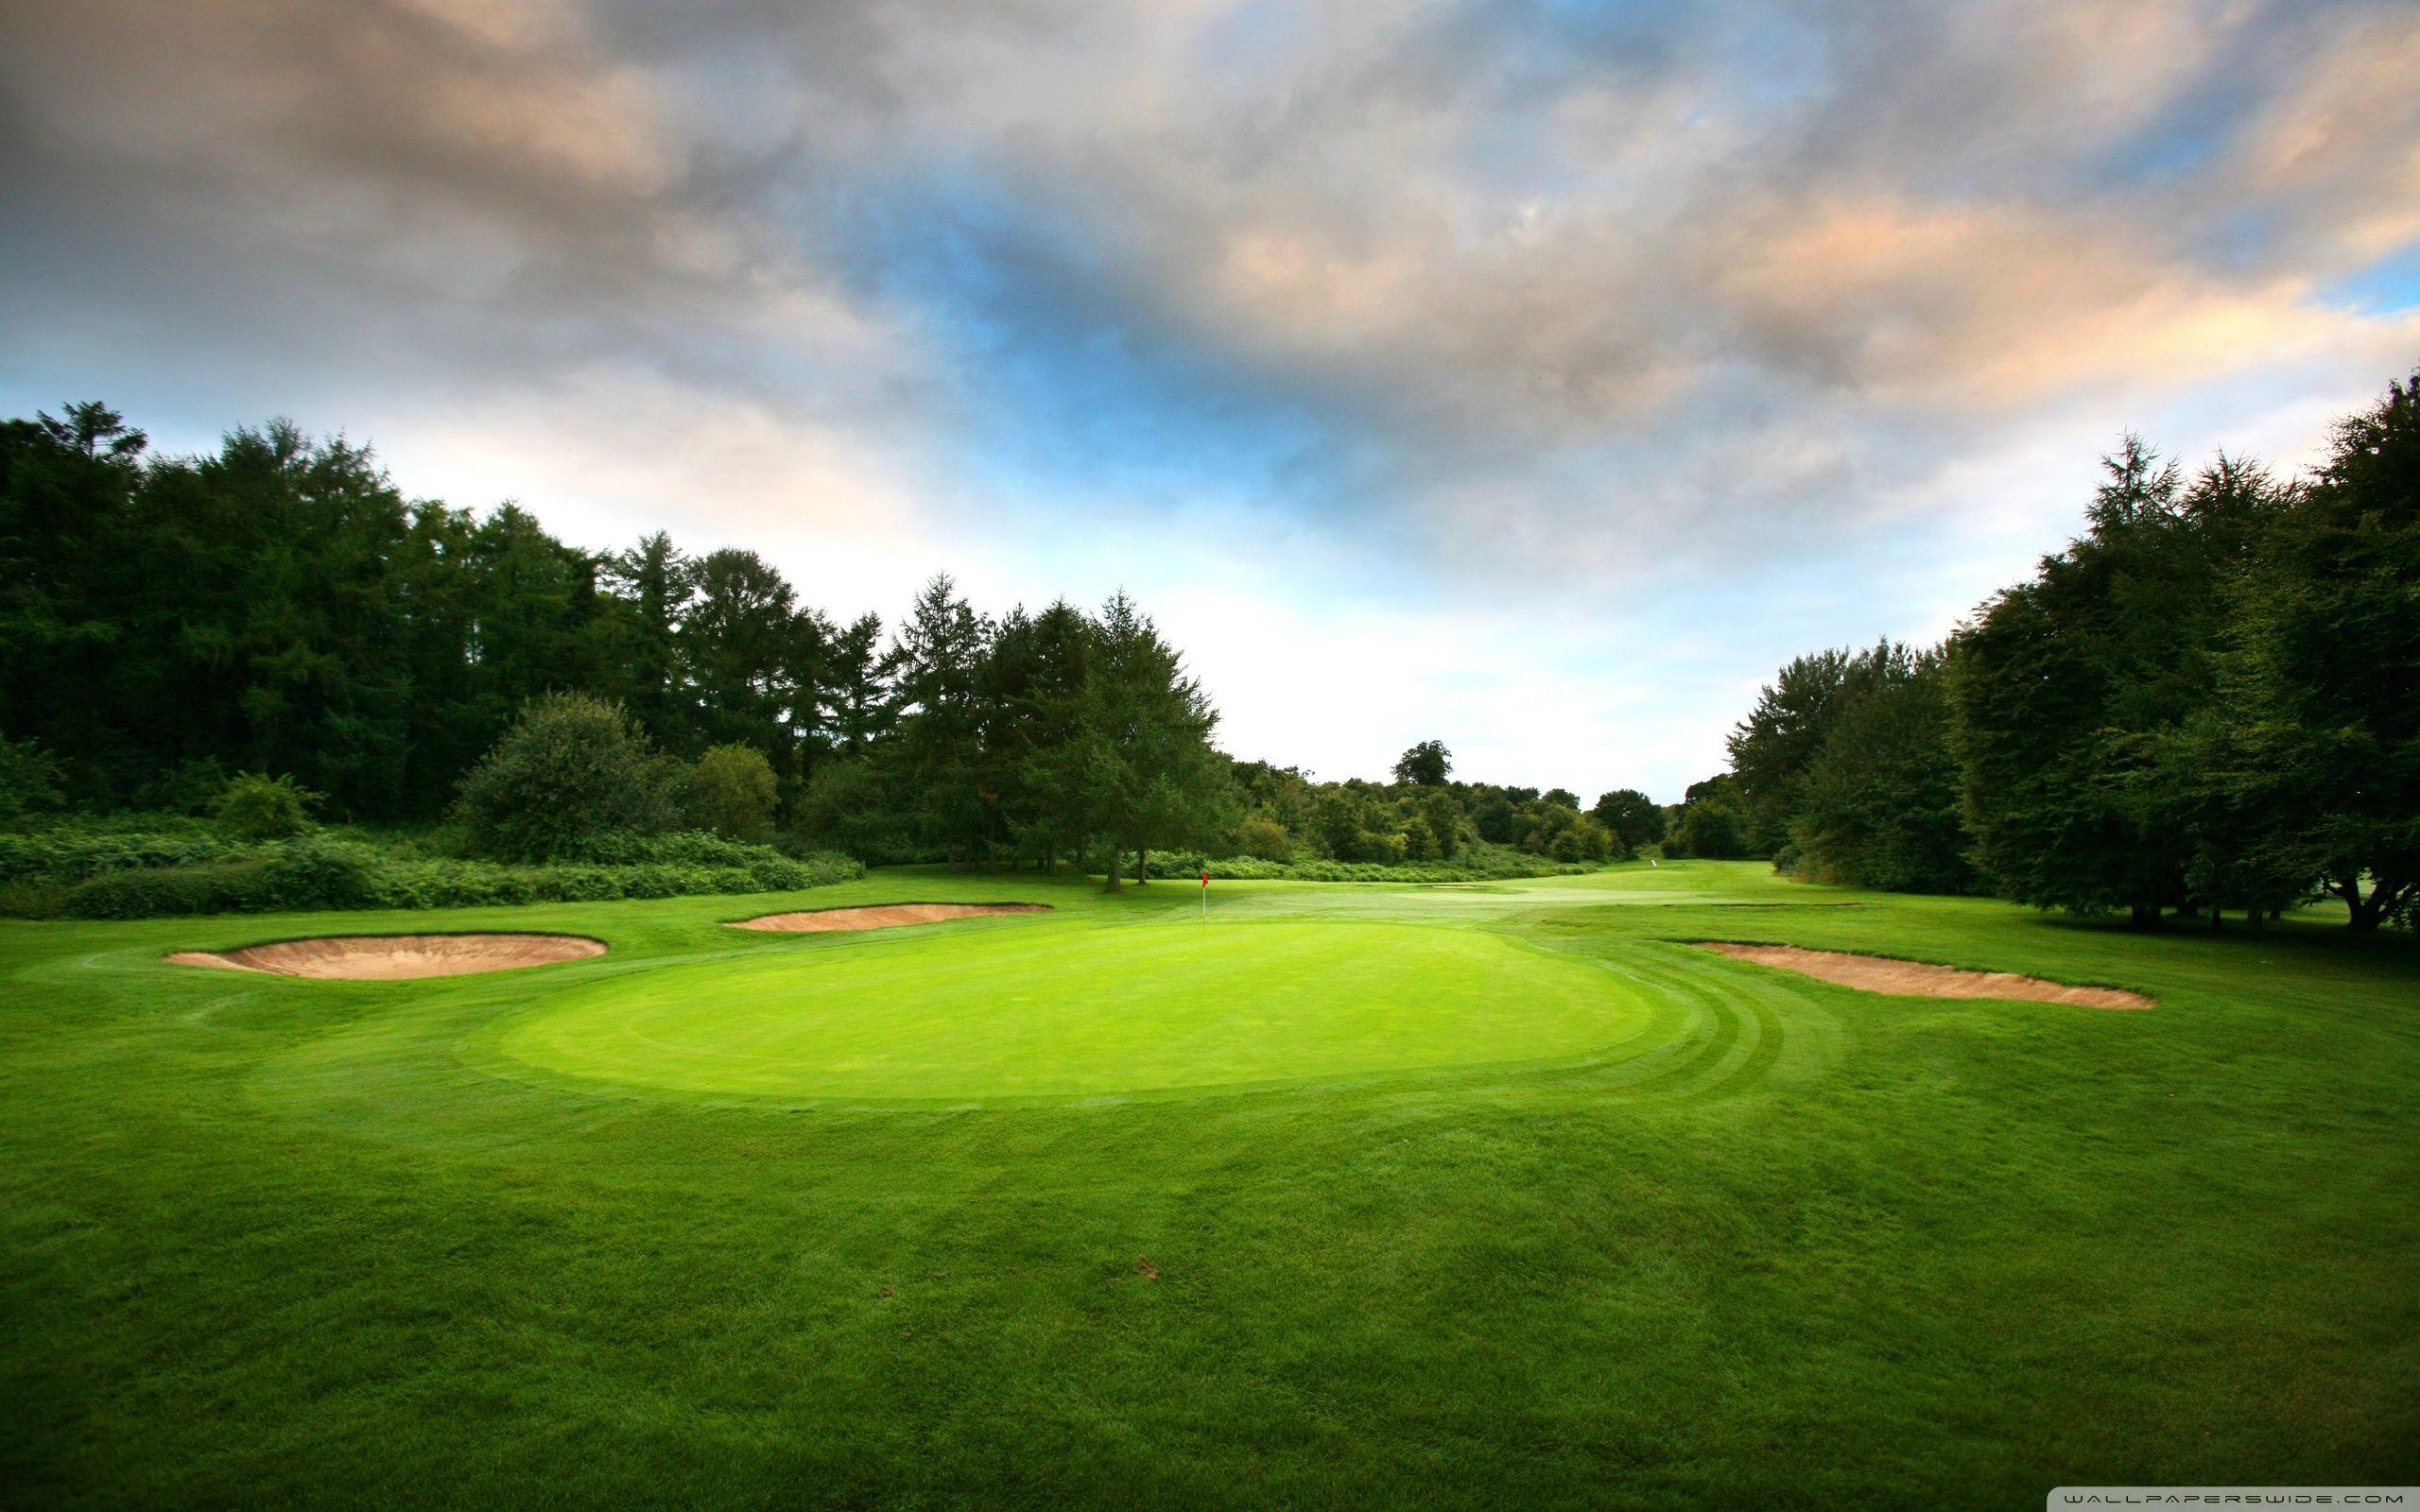 Top 100 Courses in the UK and Ireland, sorted by country